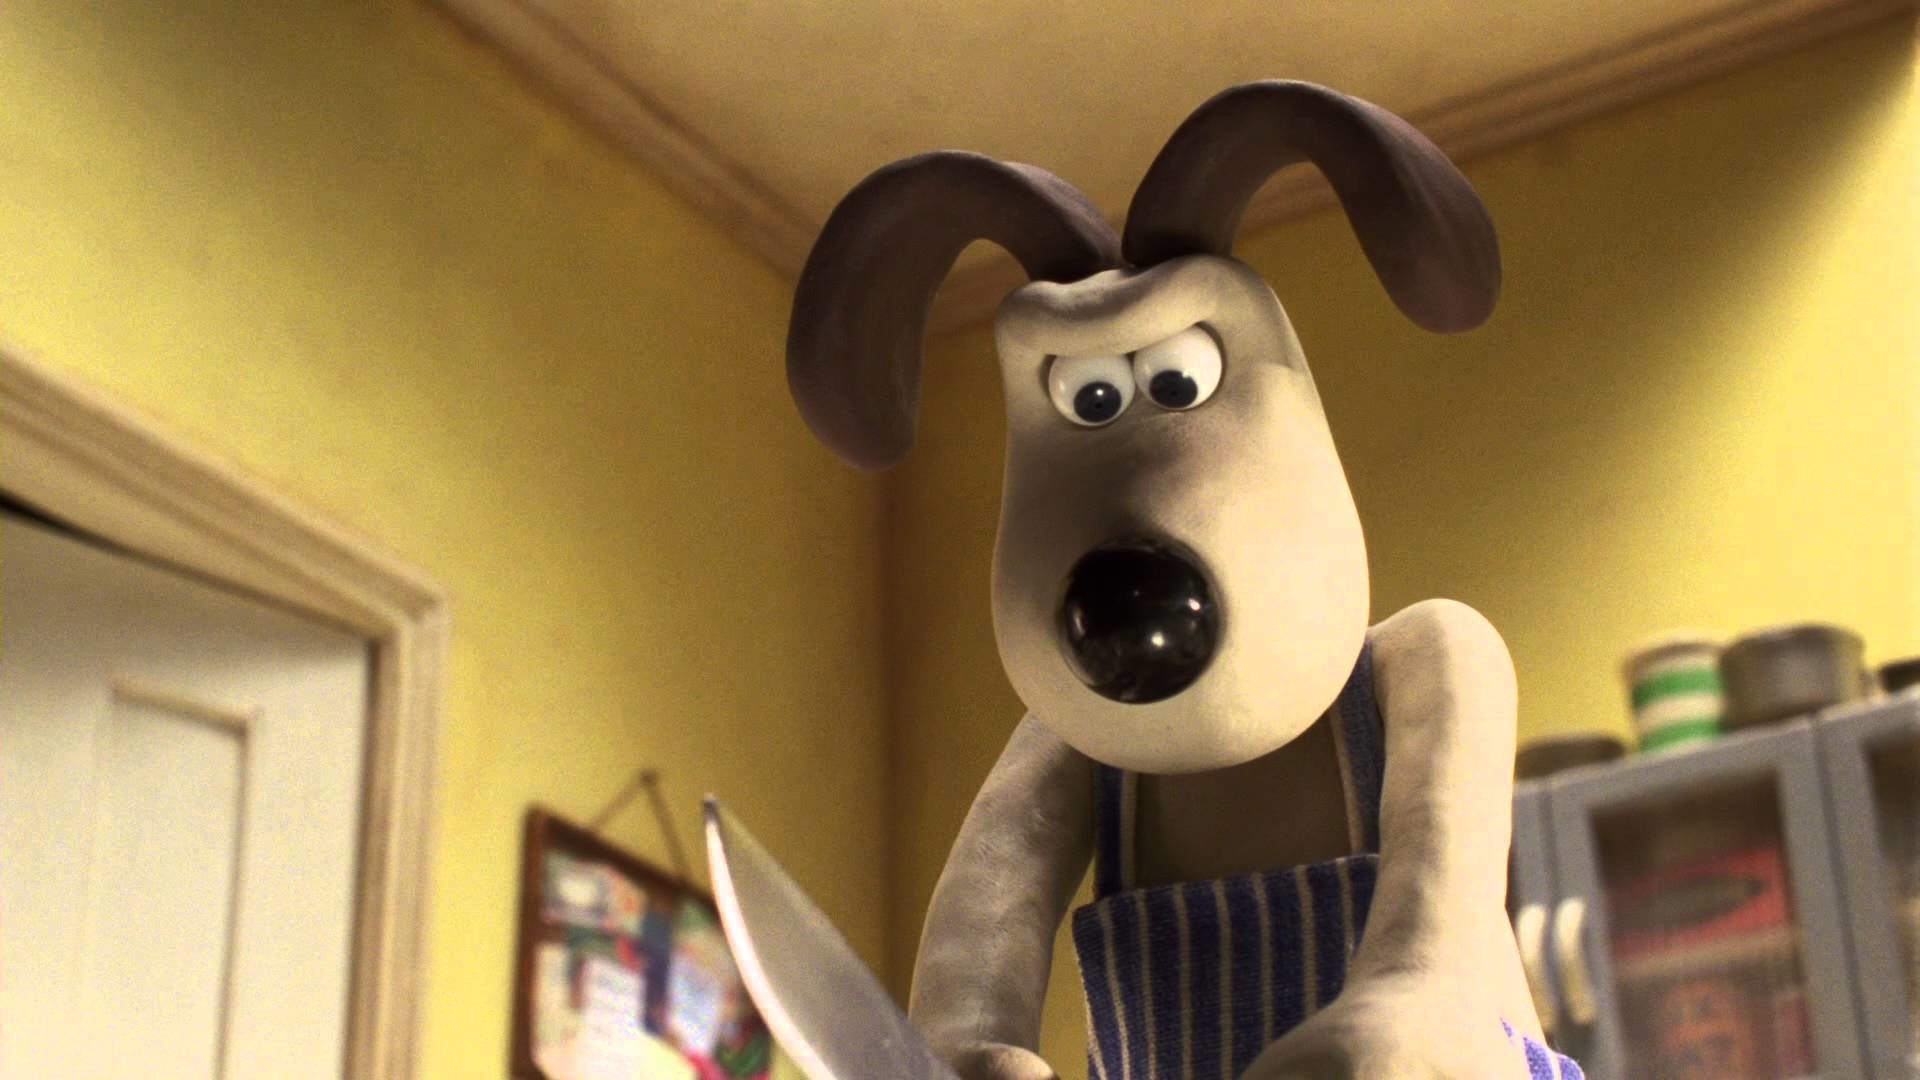 1920x1080 Wallace & Gromit: The Curse of the Were-Rabbit - Trailer